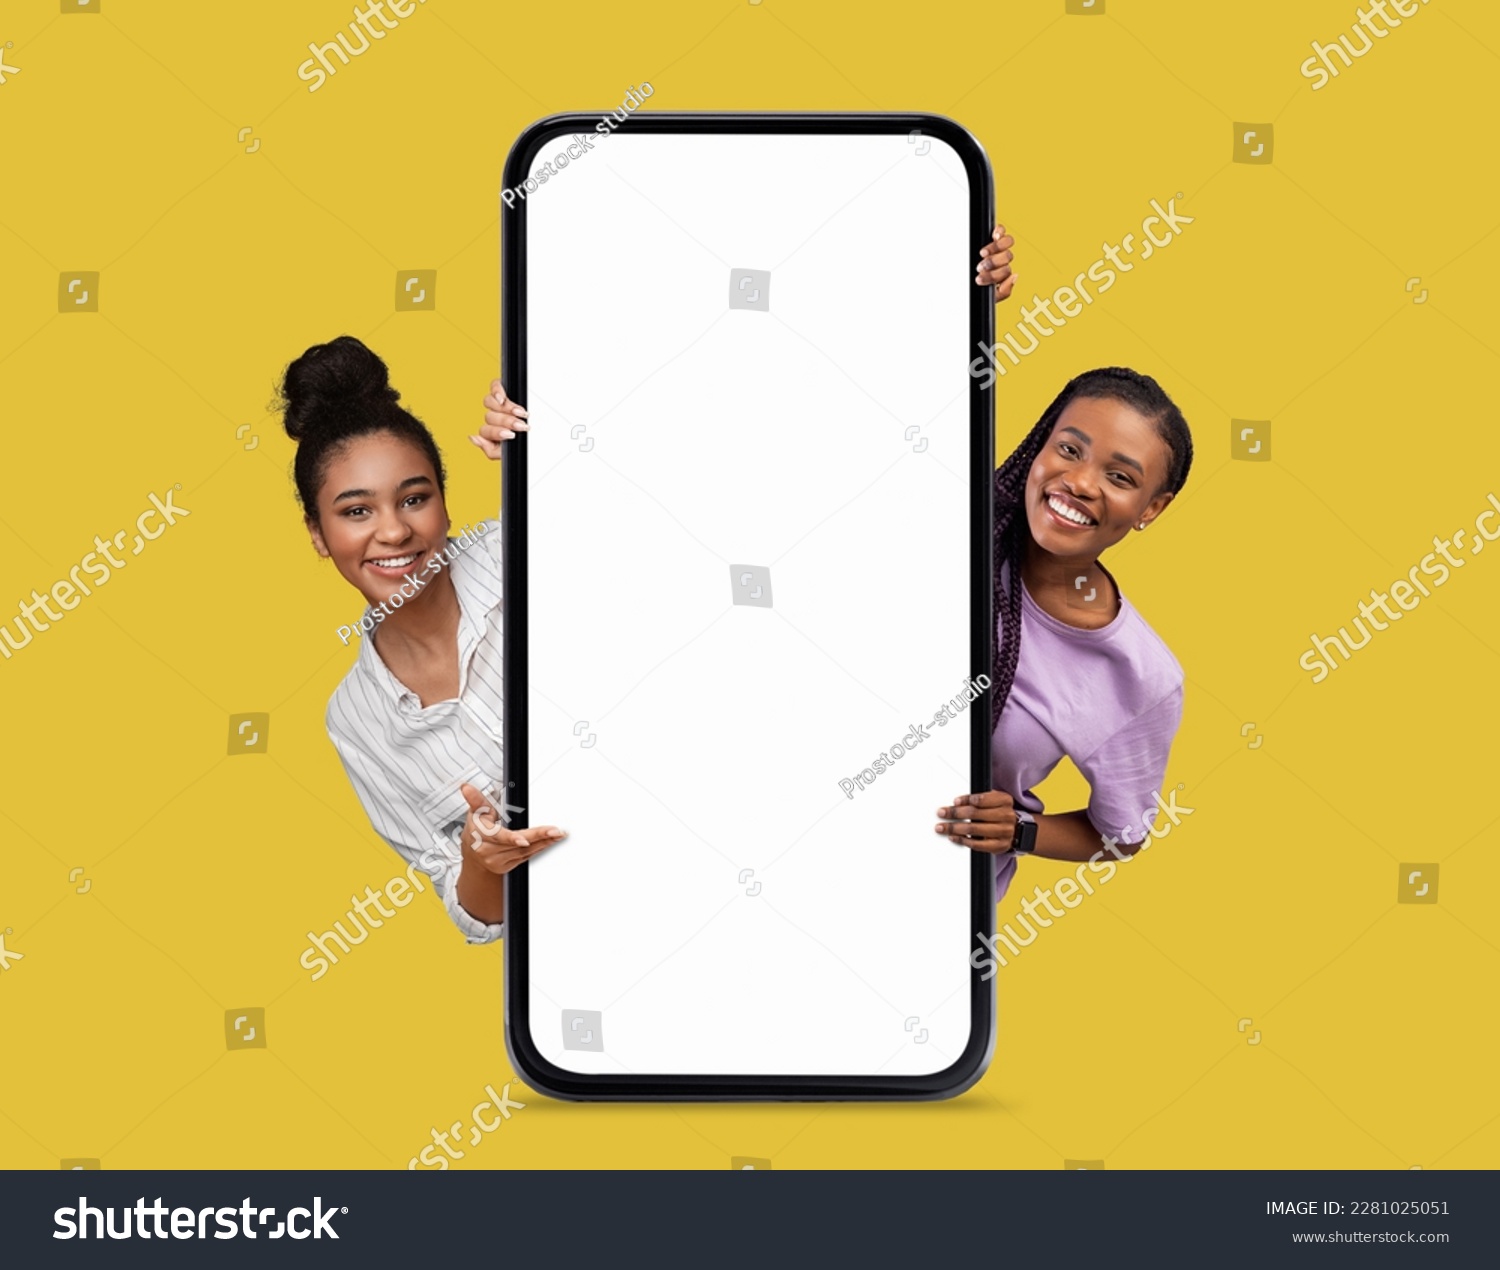 Online Offer. Two Beautiful Smiling Black Women Peeking Out Behind Big Blank Smartphone With White Screen Isolated Over Yellow Background, African American Females Showing Copy Space, Collage, Mockup #2281025051